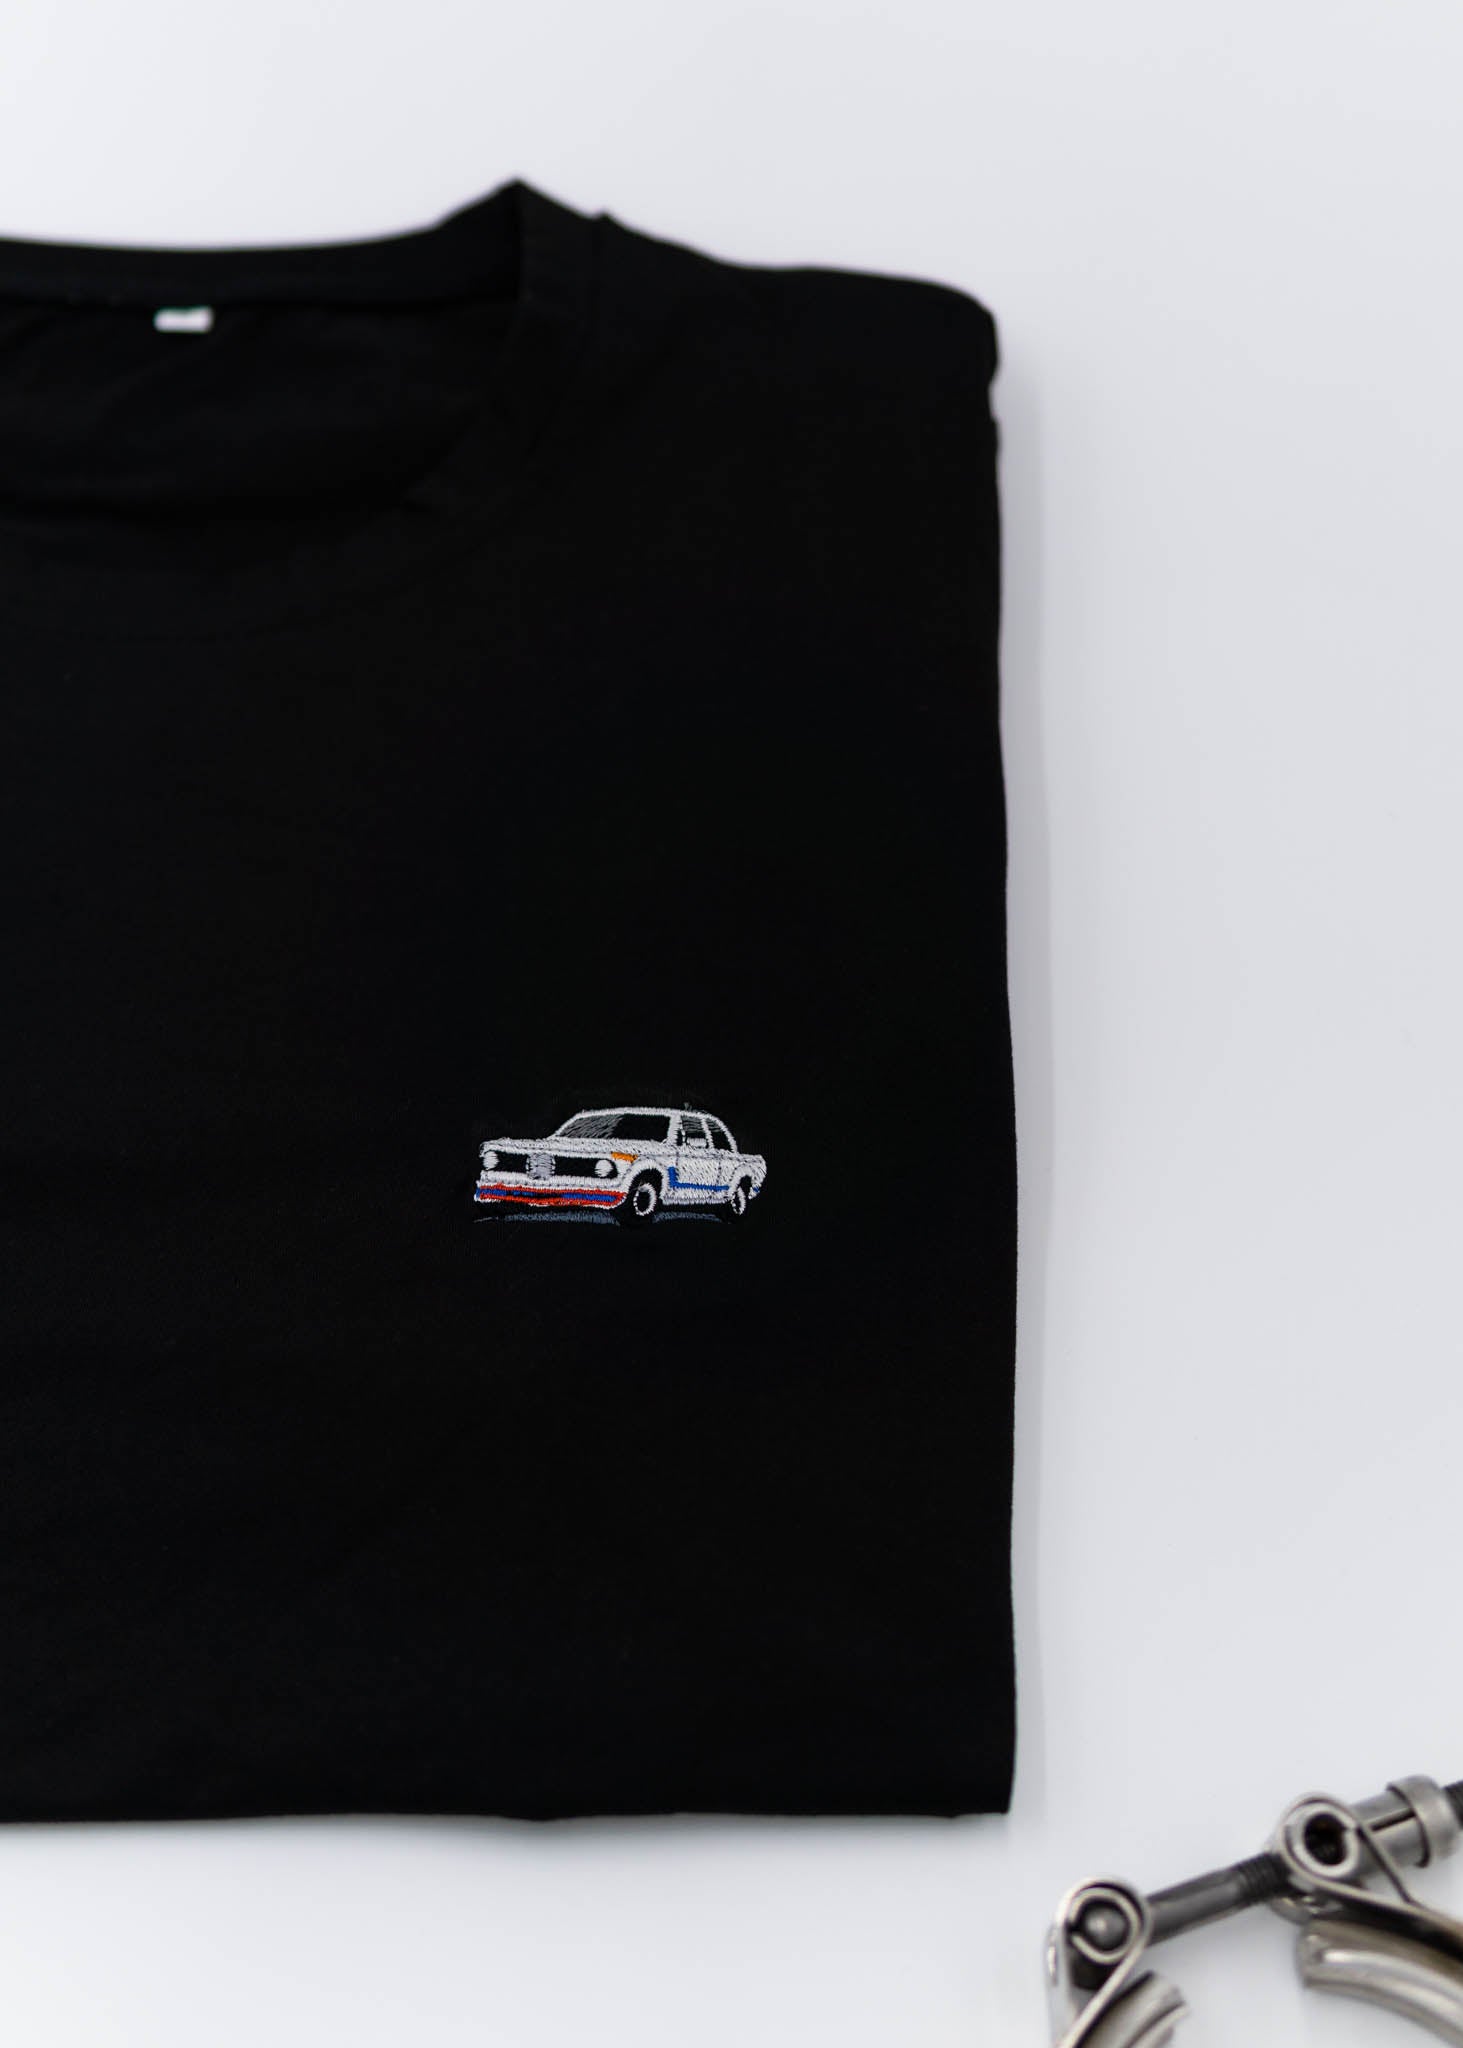 A black BMW 2002 Turbo t-shirt for men. Photo is a close up view of the shirt with an embroidered 2002 Turbo. Fabric composition is a polyester and cotton mix. The material is very soft, stretchy, non-transparent. The style of this shirt is short sleeve, with a crewneck neckline.